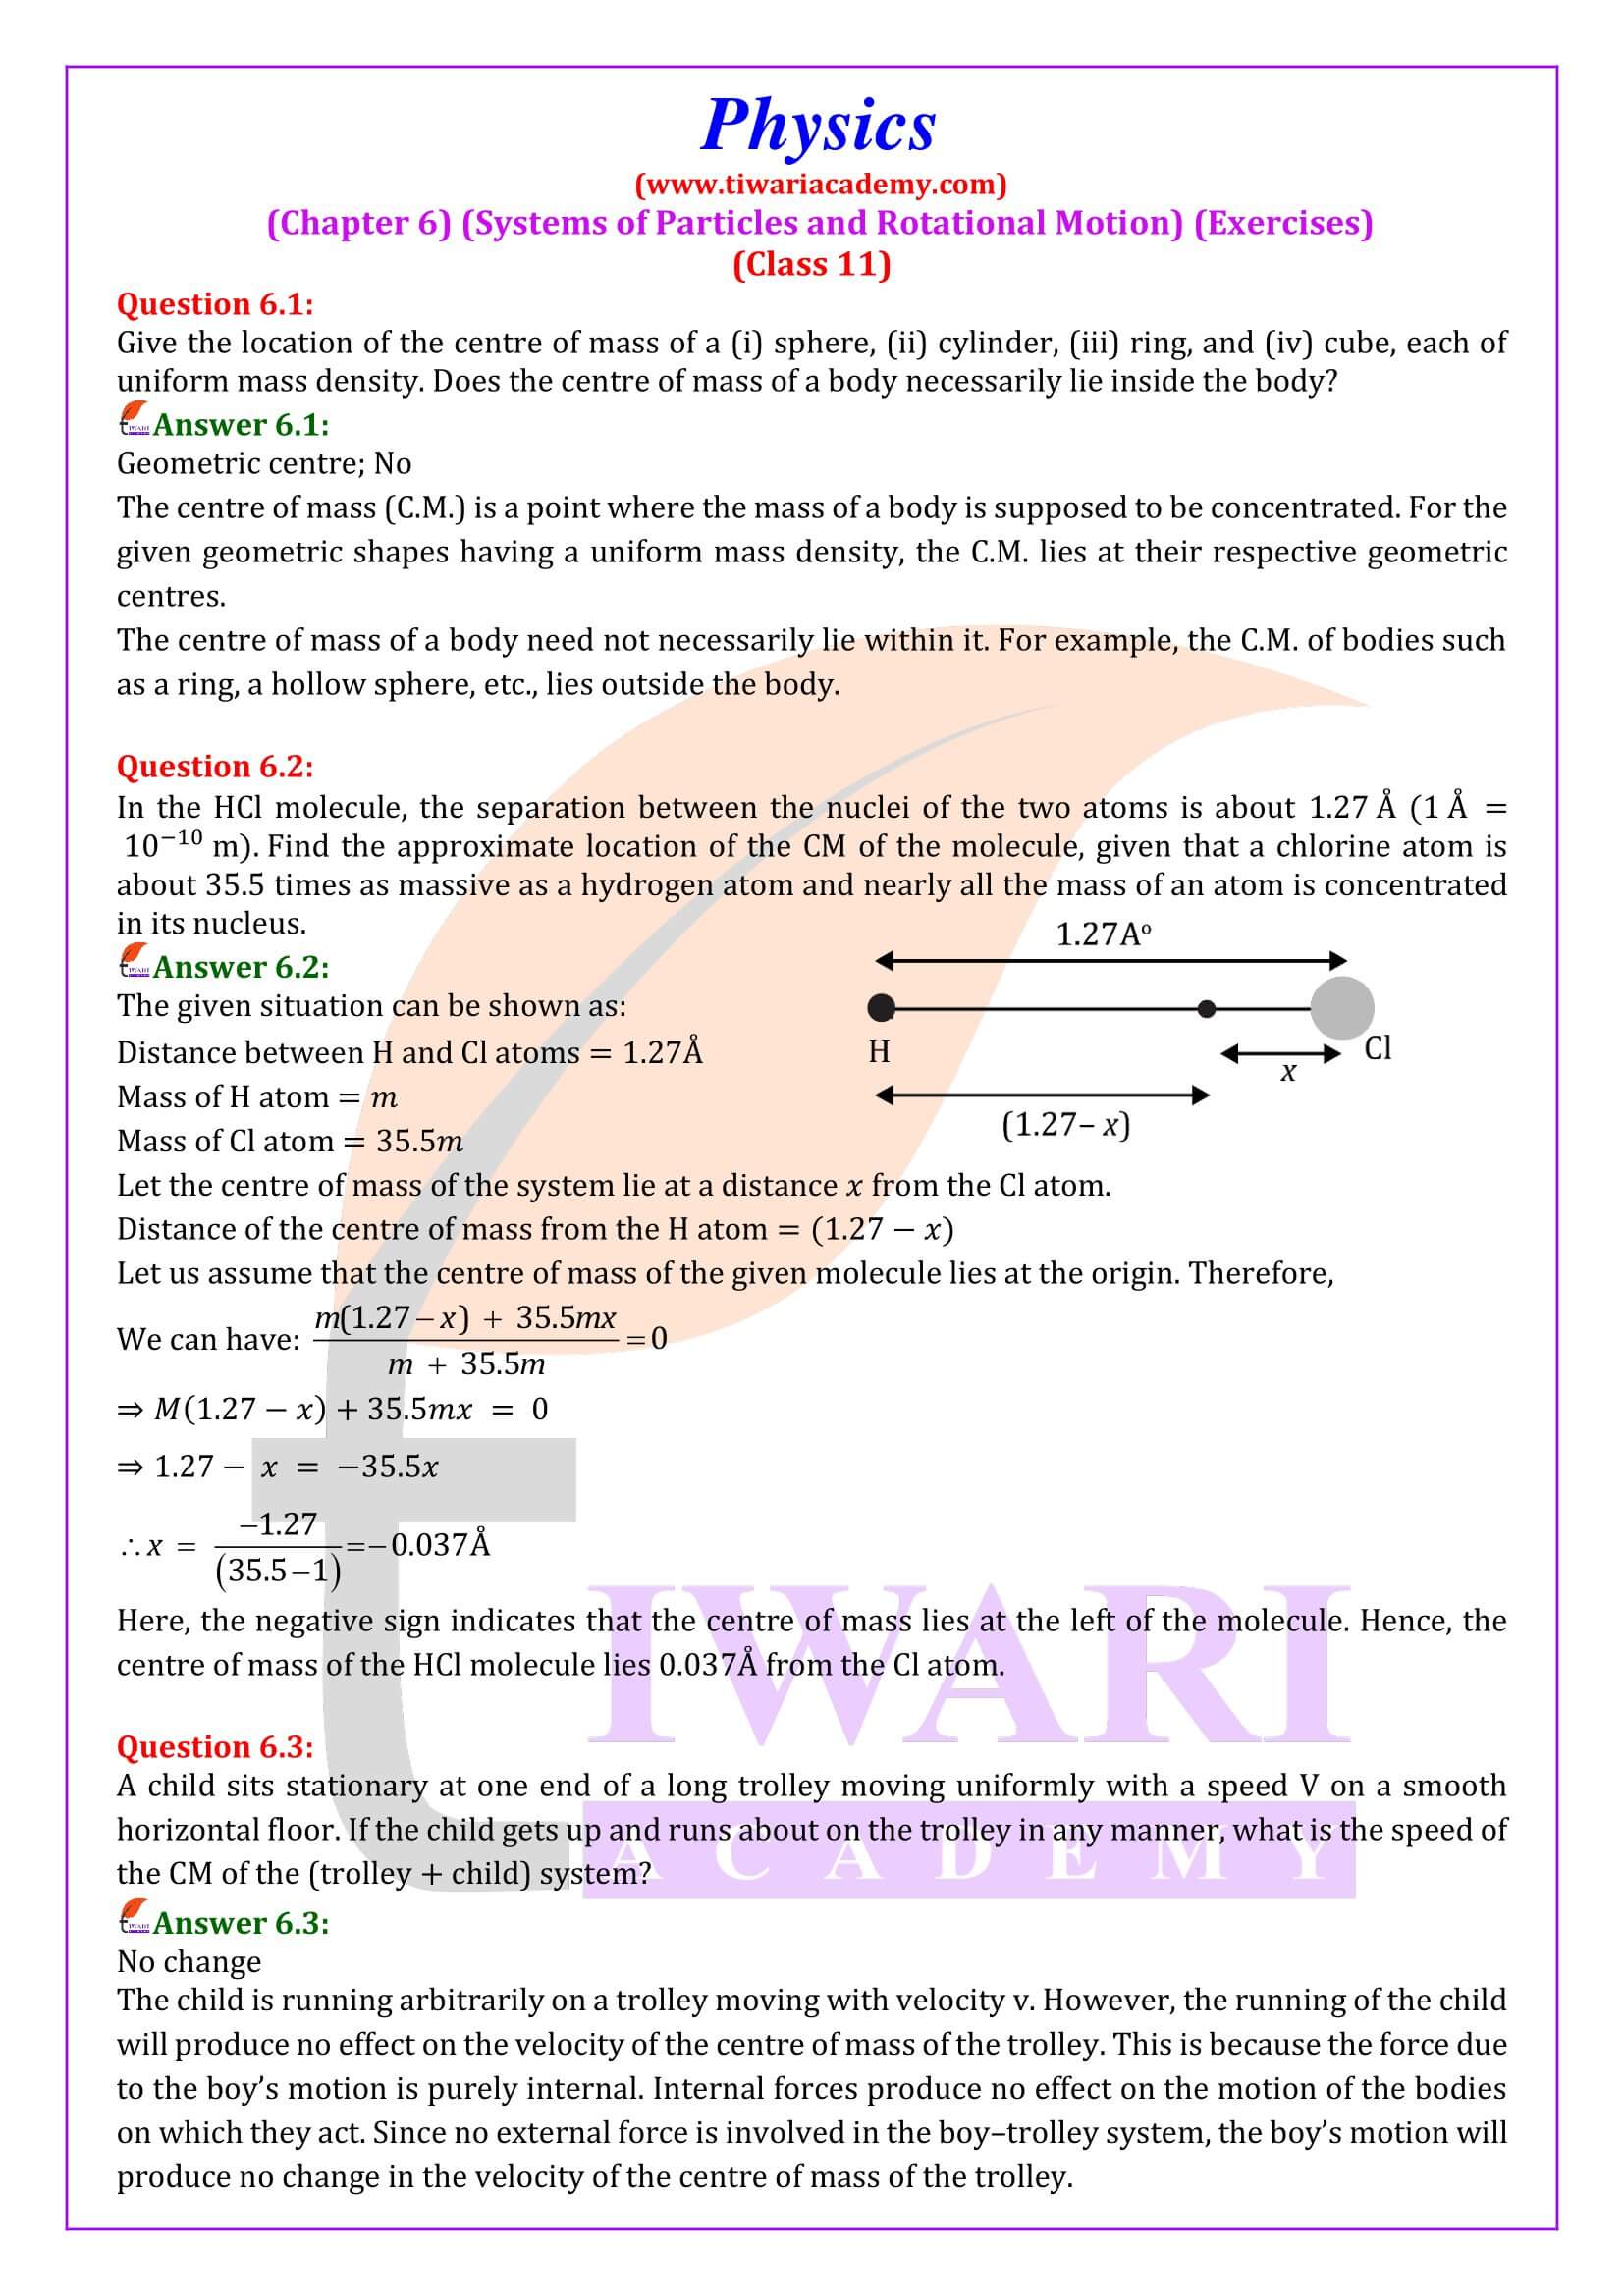 Class 11 Physics Chapter 6 System of Particles and Rotational Motion